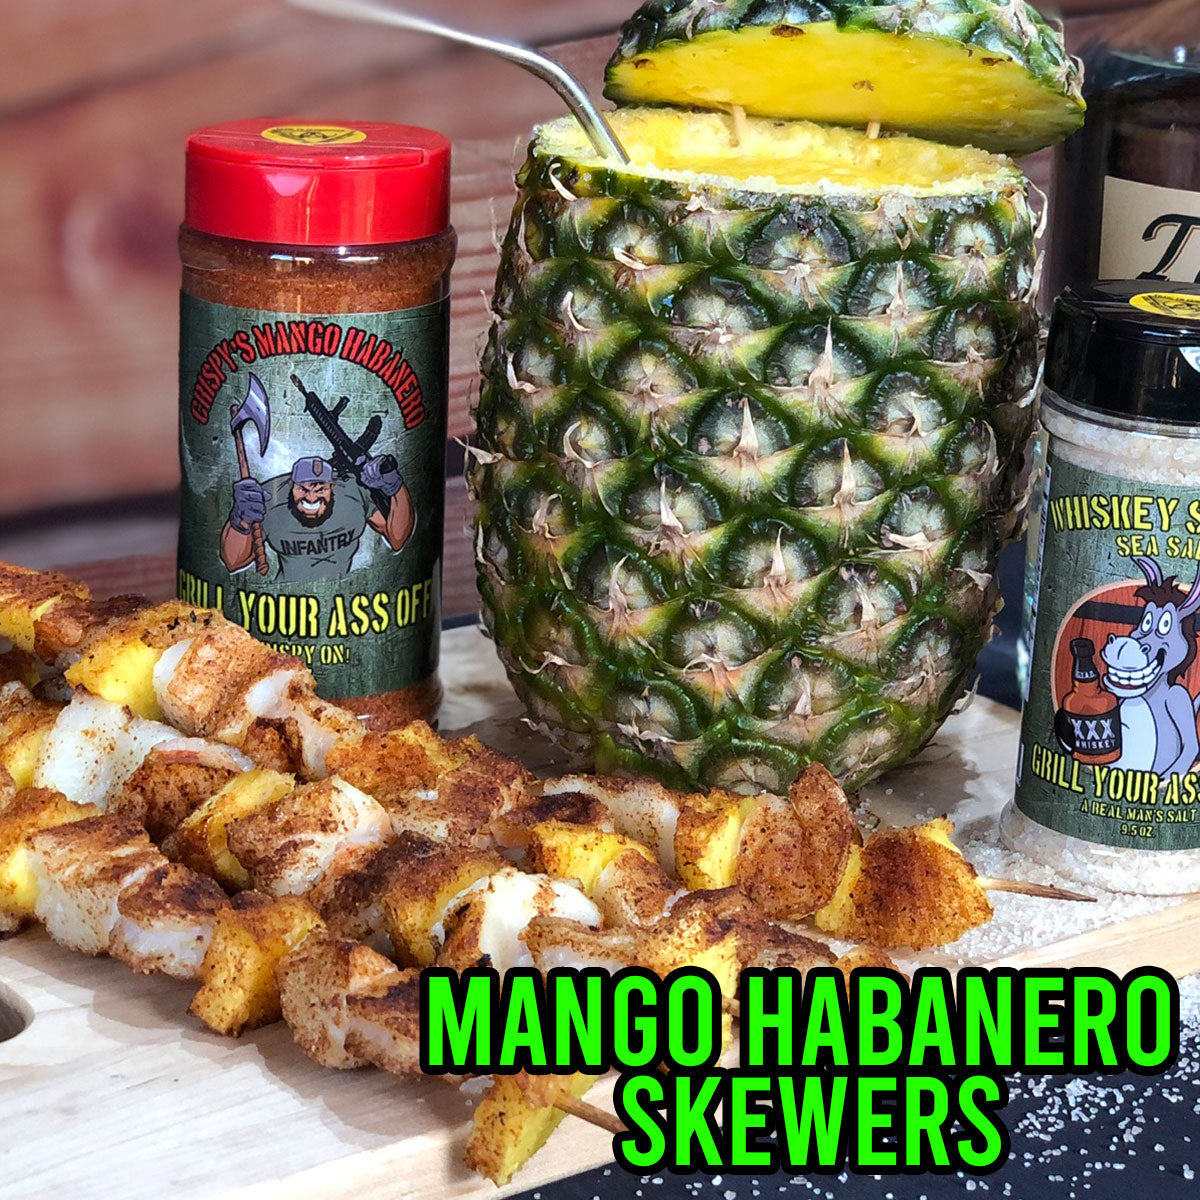 MANGO HABANERO SKEWERS | Grill Your Ass Off